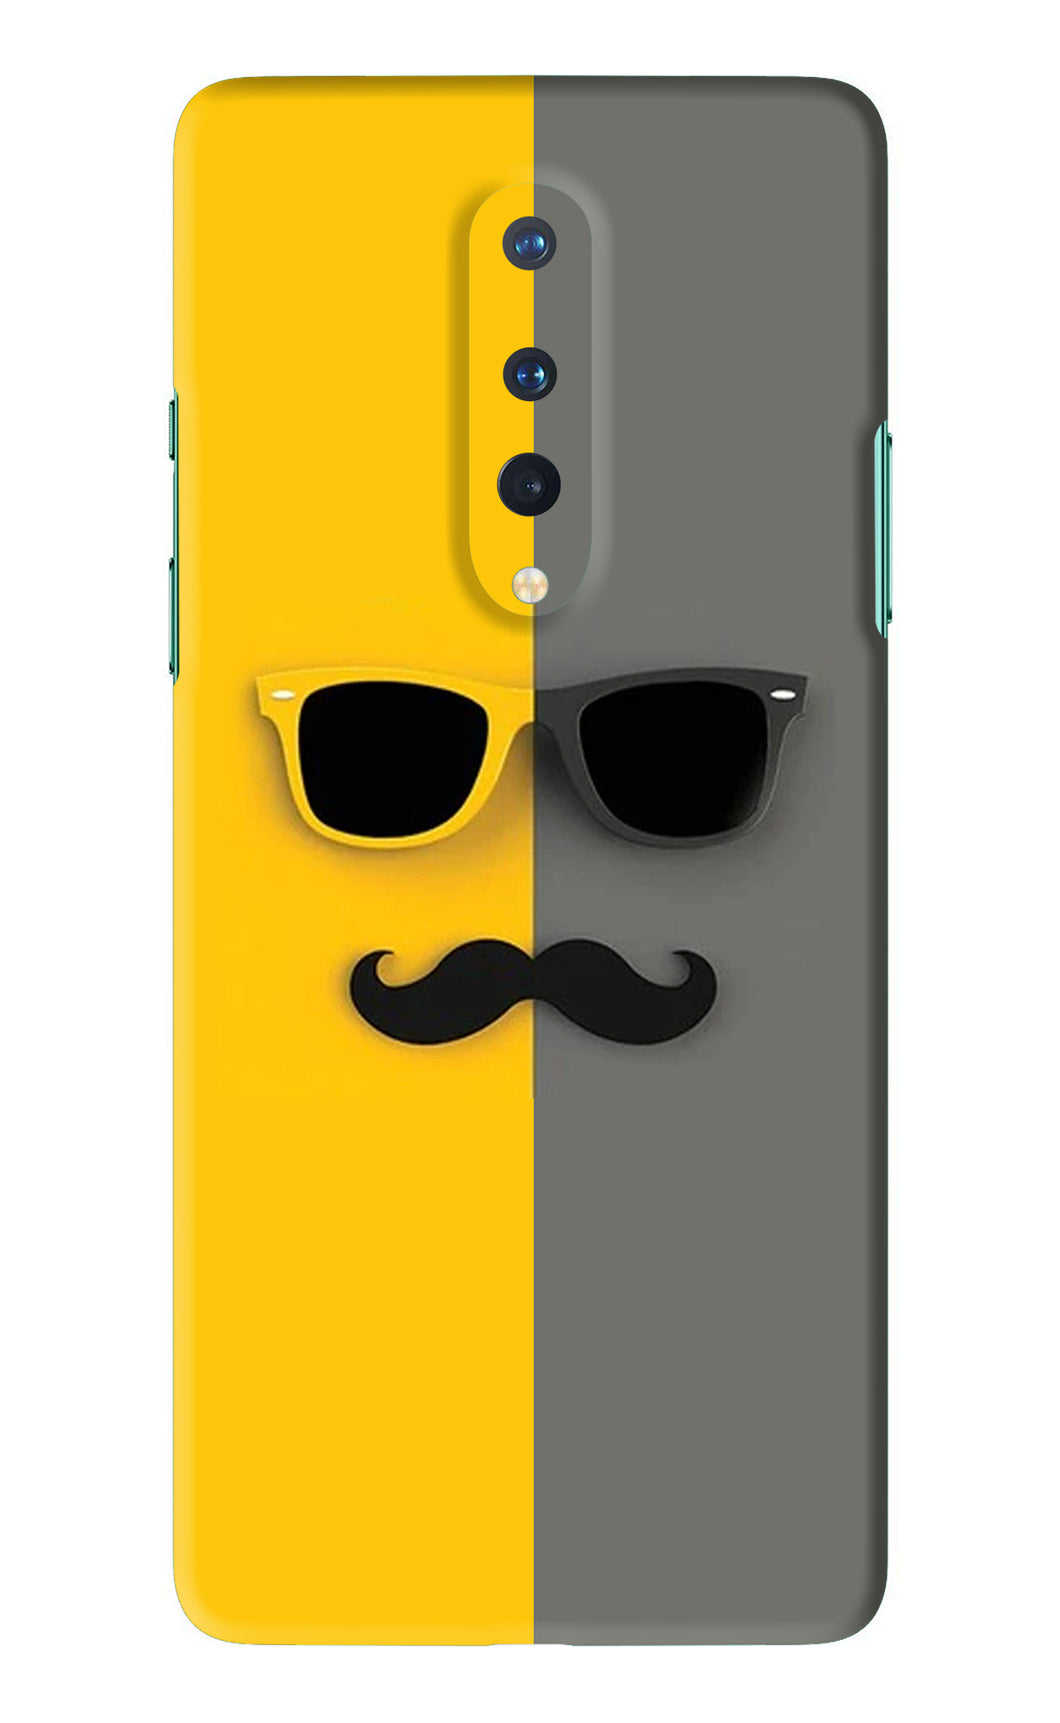 Sunglasses with Mustache OnePlus 8 Back Skin Wrap